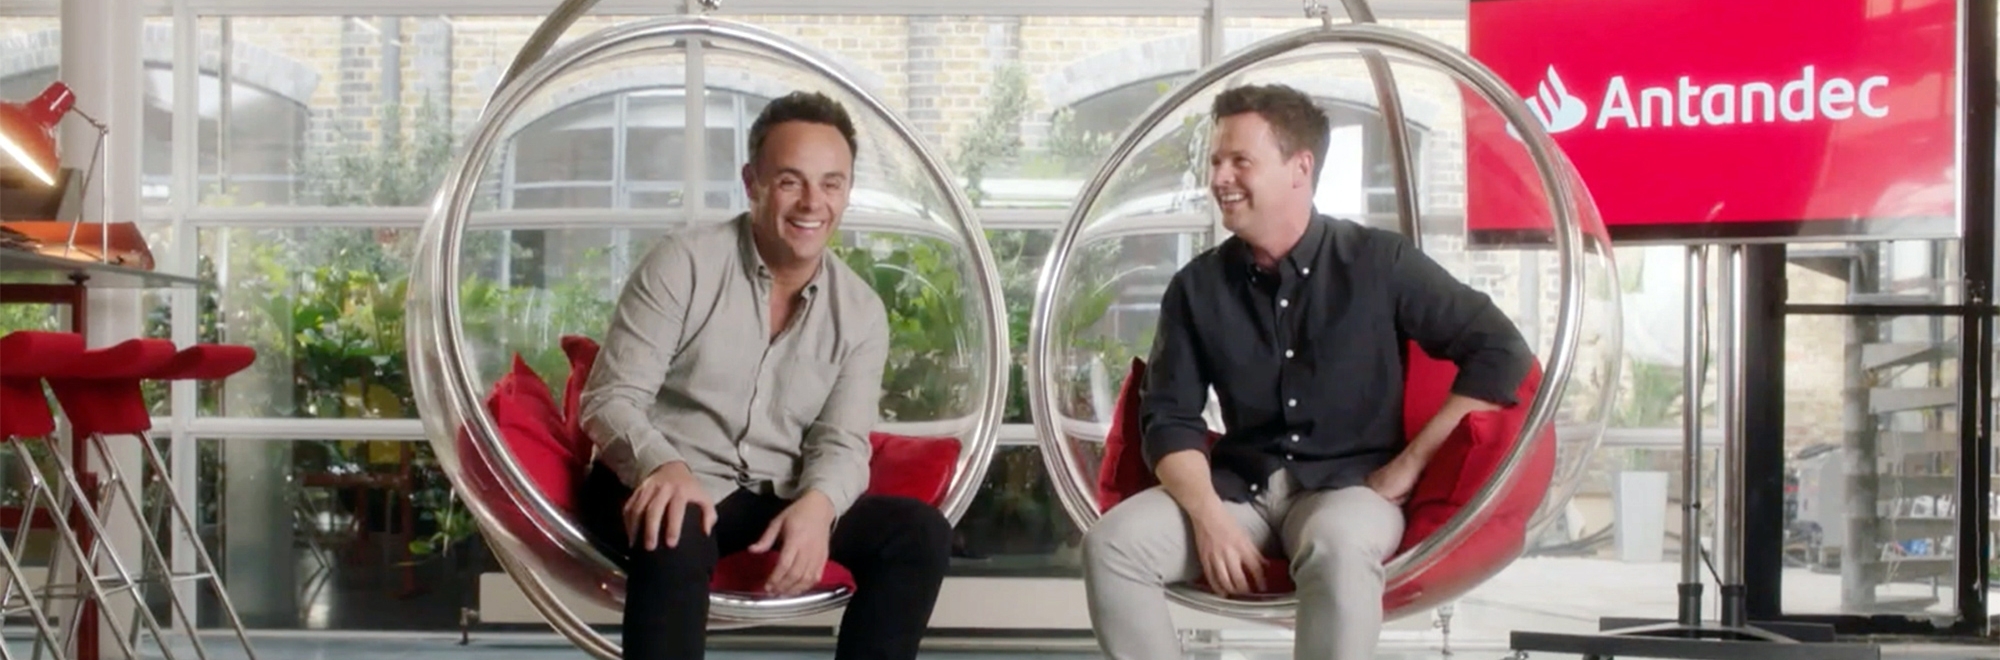 Why Santander's spoof ad starring Ant and Dec was ‘impeccable’